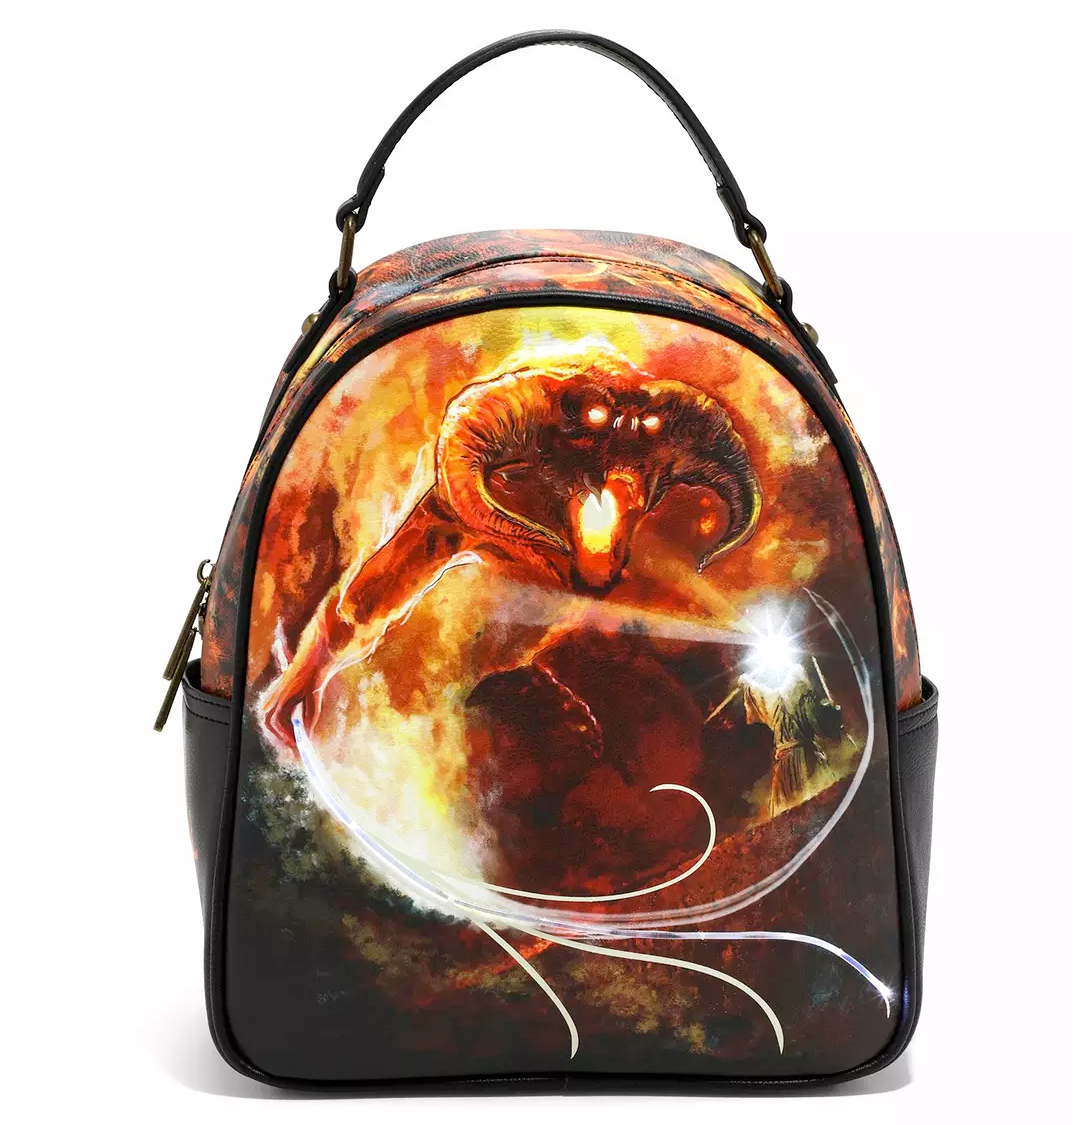 Balrog and Gandalf mini-backpack illuminated with LEDs (The Lord of the Rings)